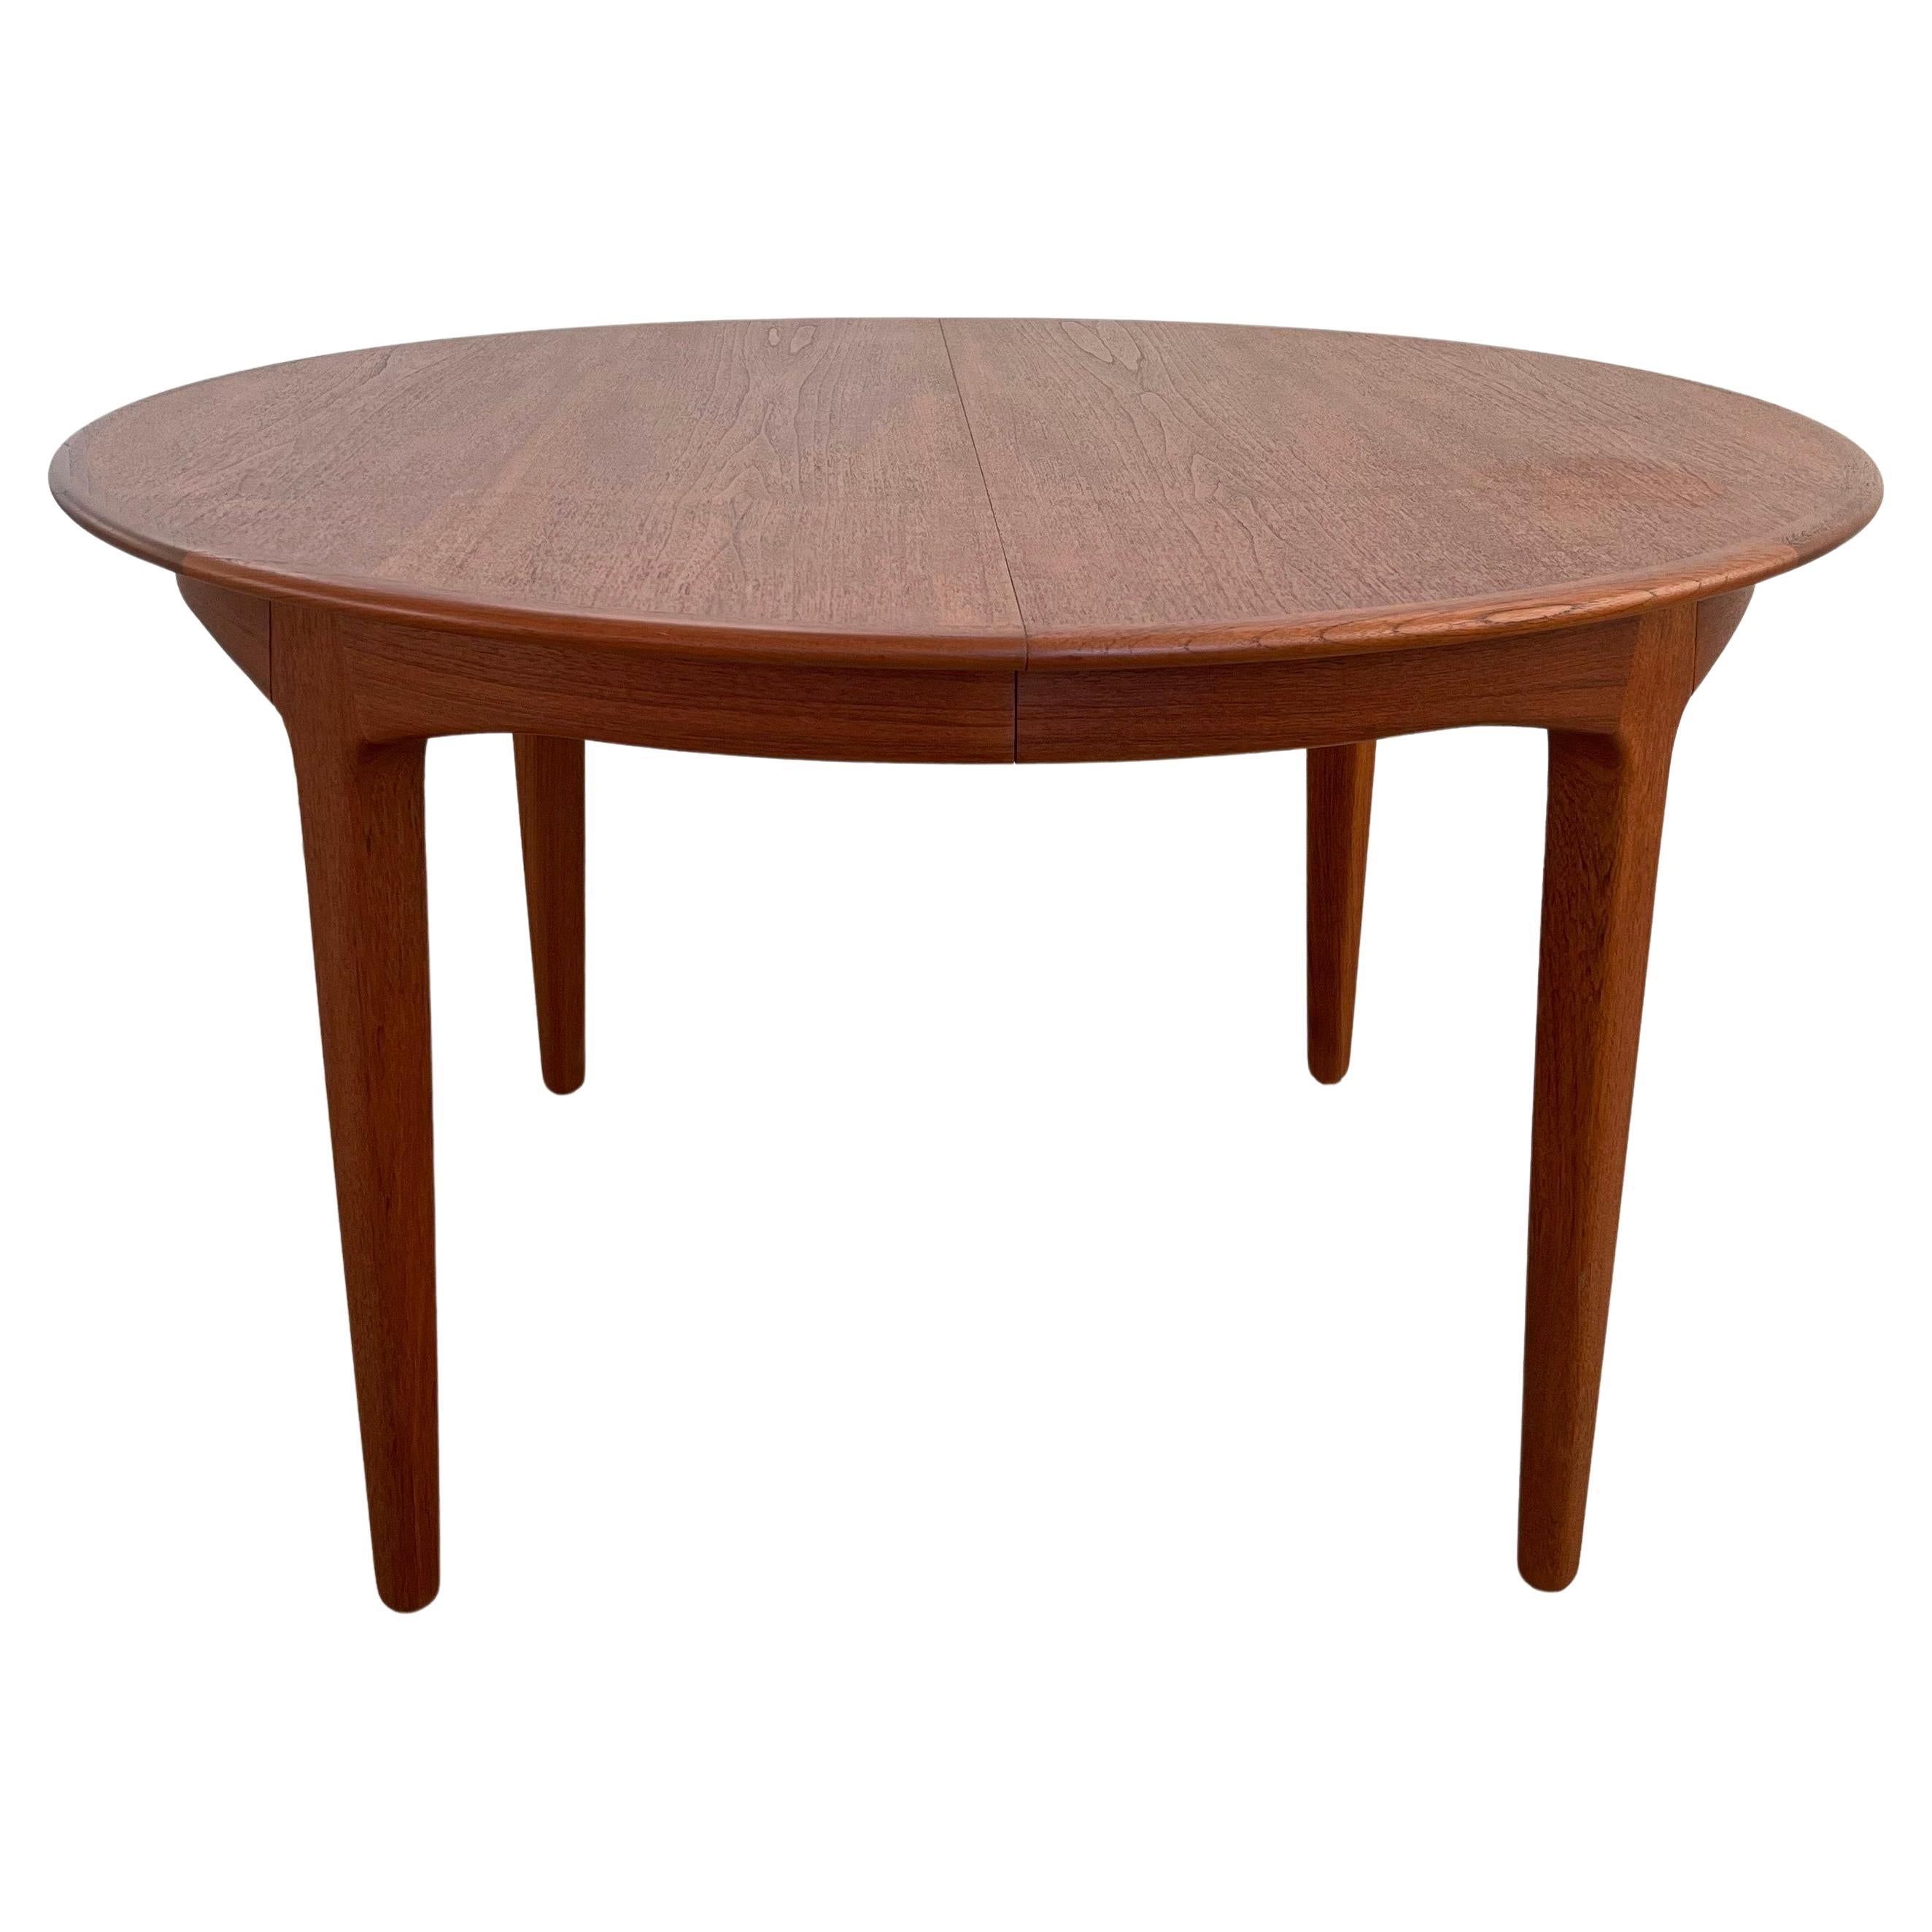 Round Teak Extension Dining Table By Henning Kjaernulf For Soro Stole, Denmark For Sale